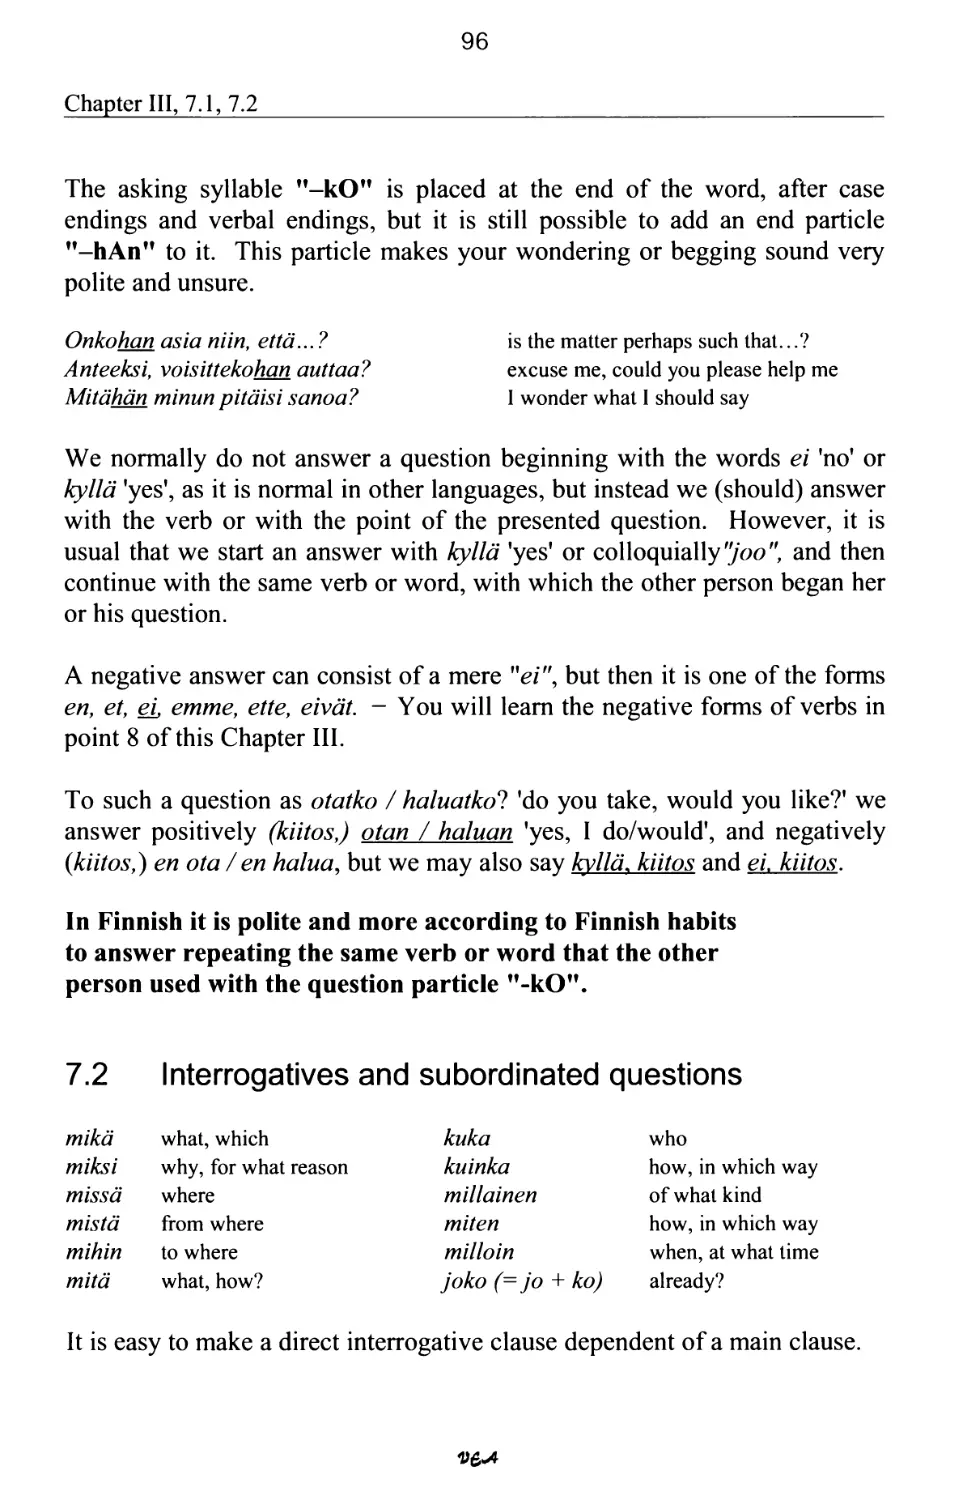 7.2 Interrogatives and subordinated questions